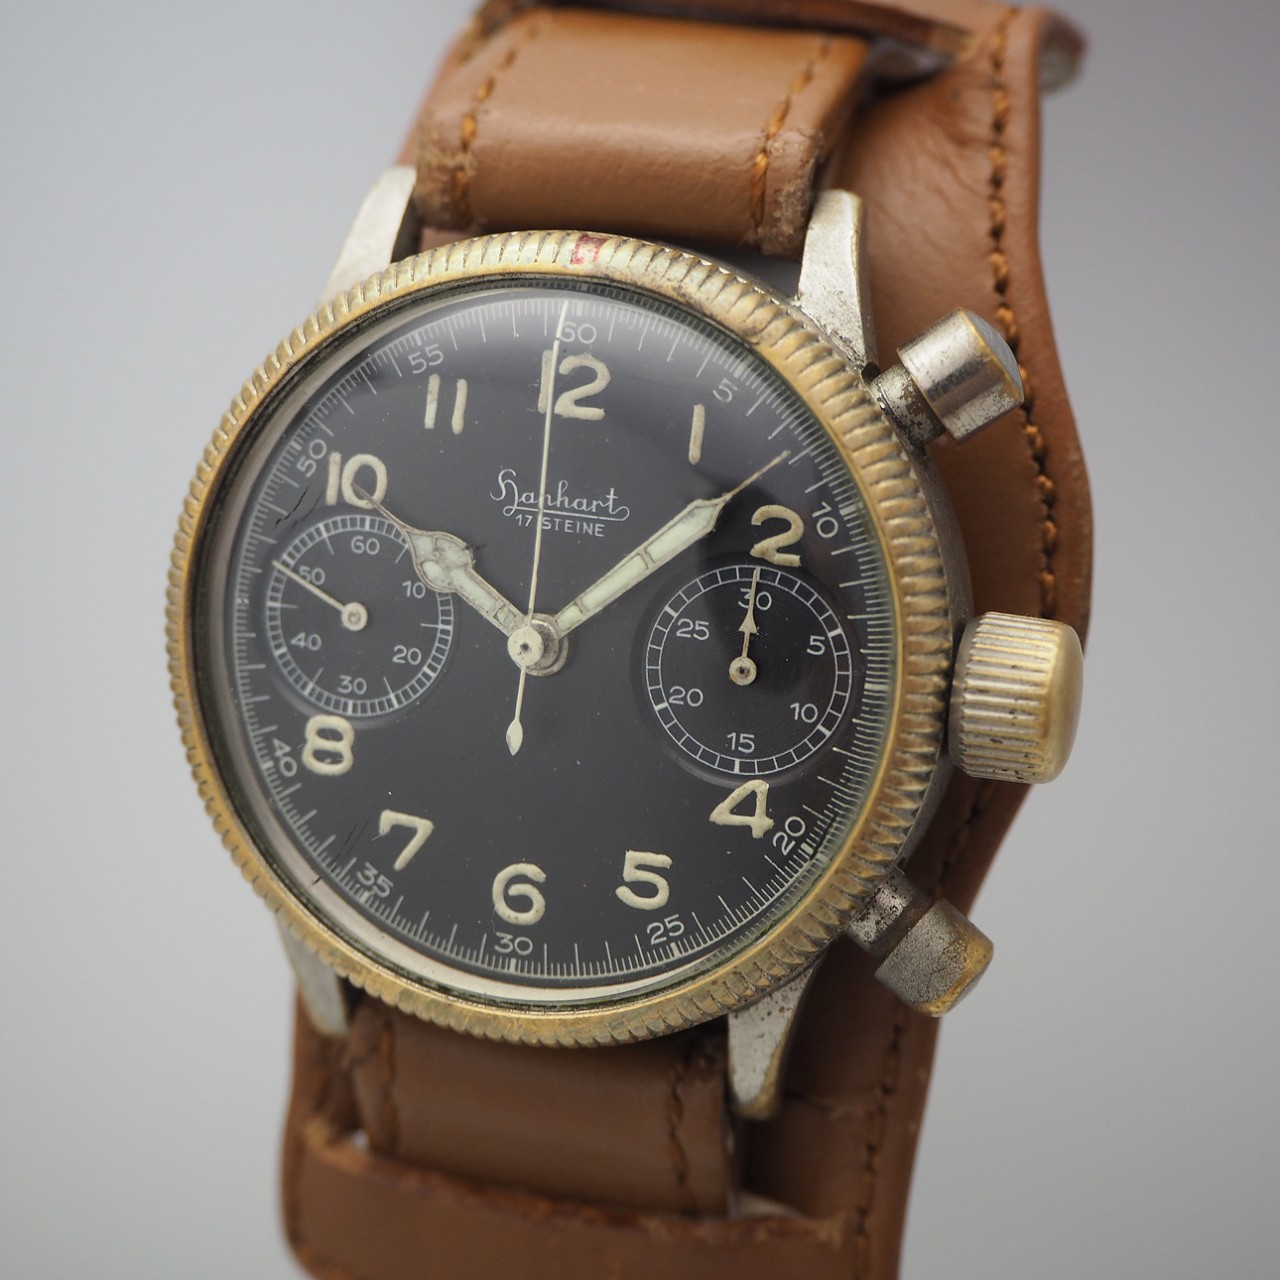 Hanhart Vintage Chronograph Cal.41 Flyback WW2, serviced-